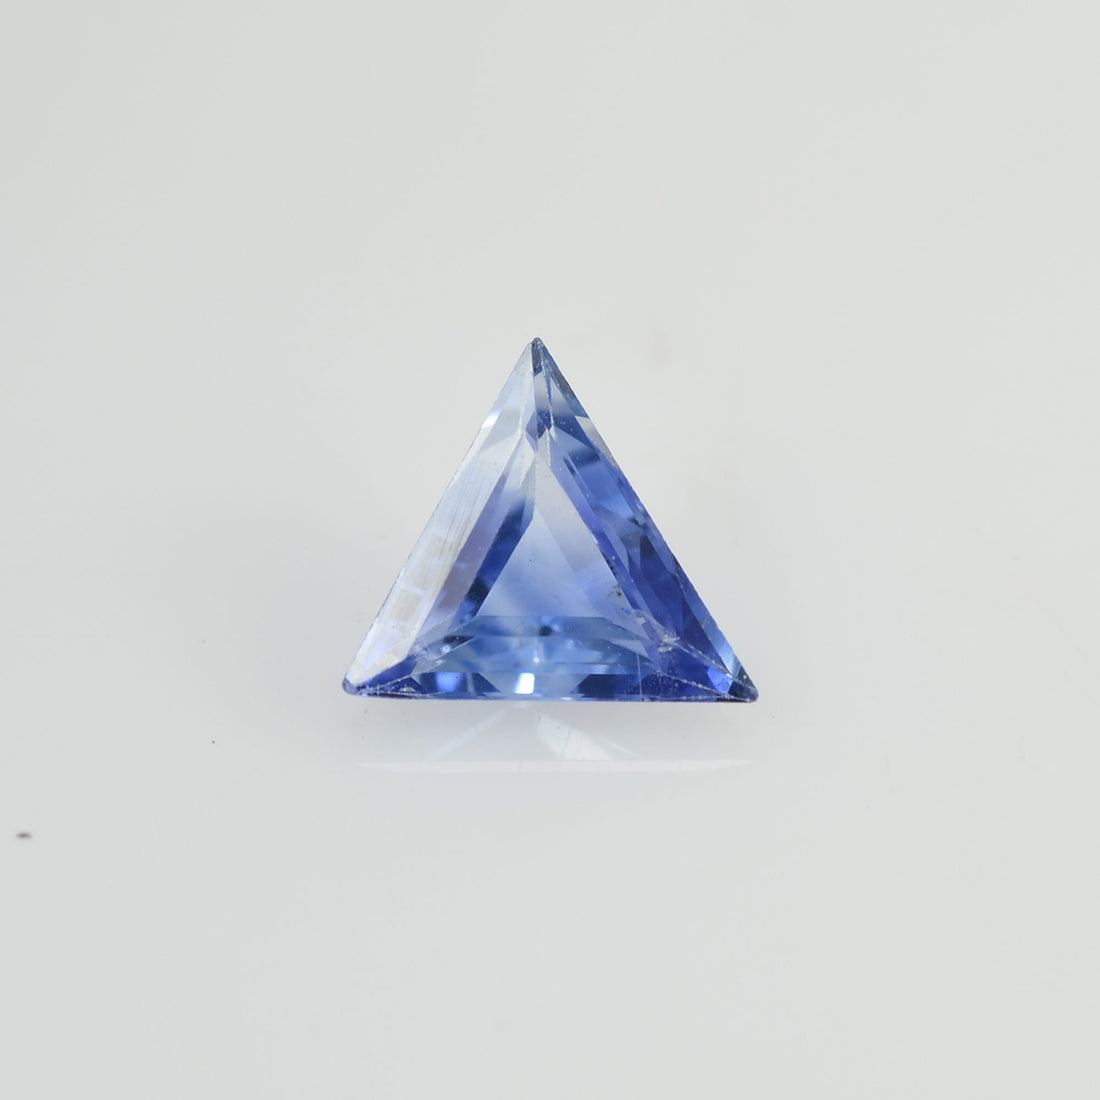 0.34 cts Natural Blue Sapphire Loose Gemstone Fancy Cut